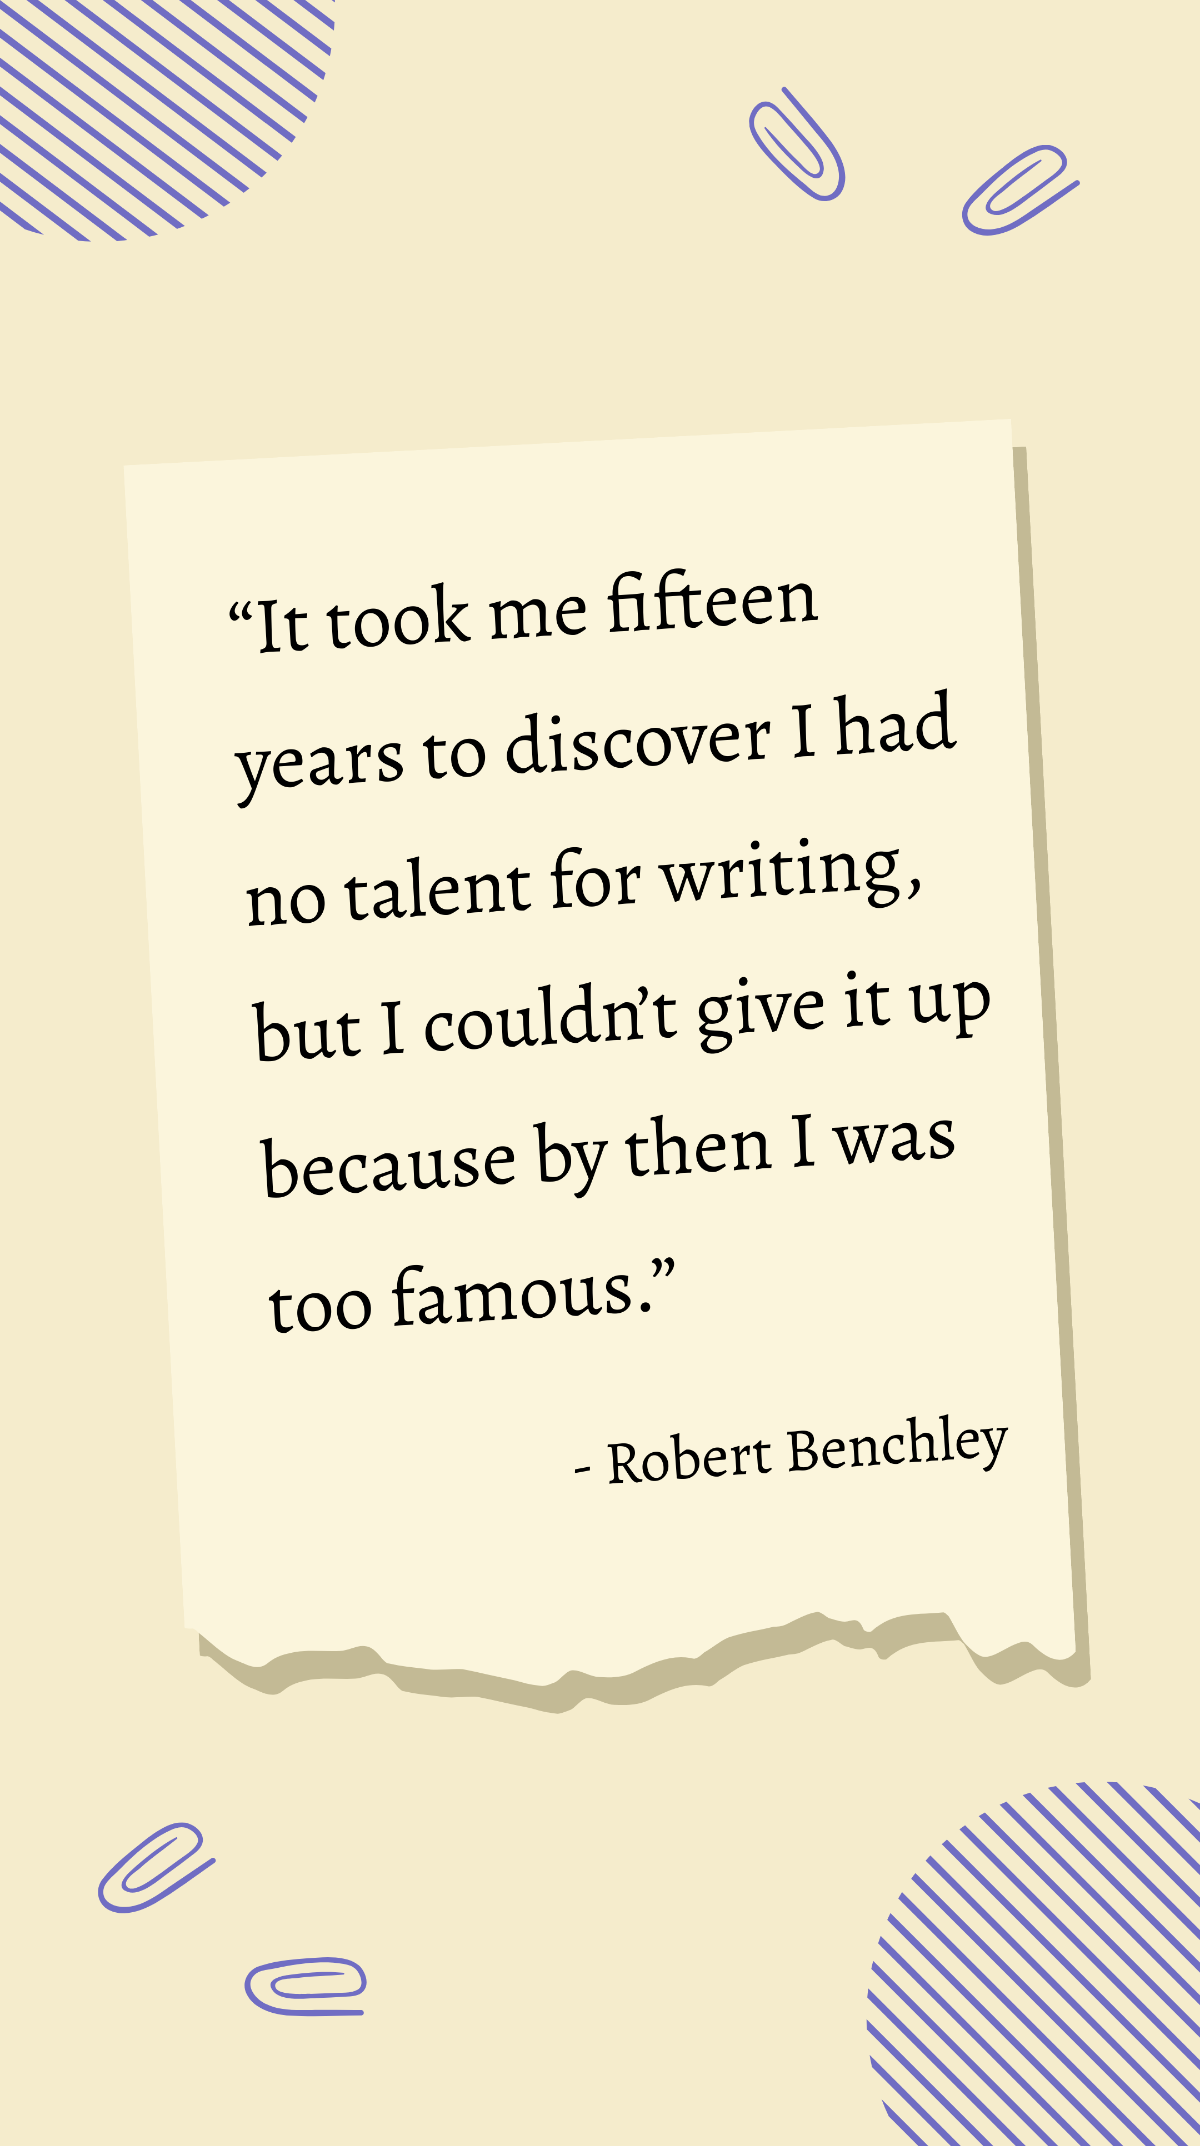 Robert Benchley - It took me fifteen years to discover I had no talent for writing, but I couldn’t give it up because by then I was too famous. Template